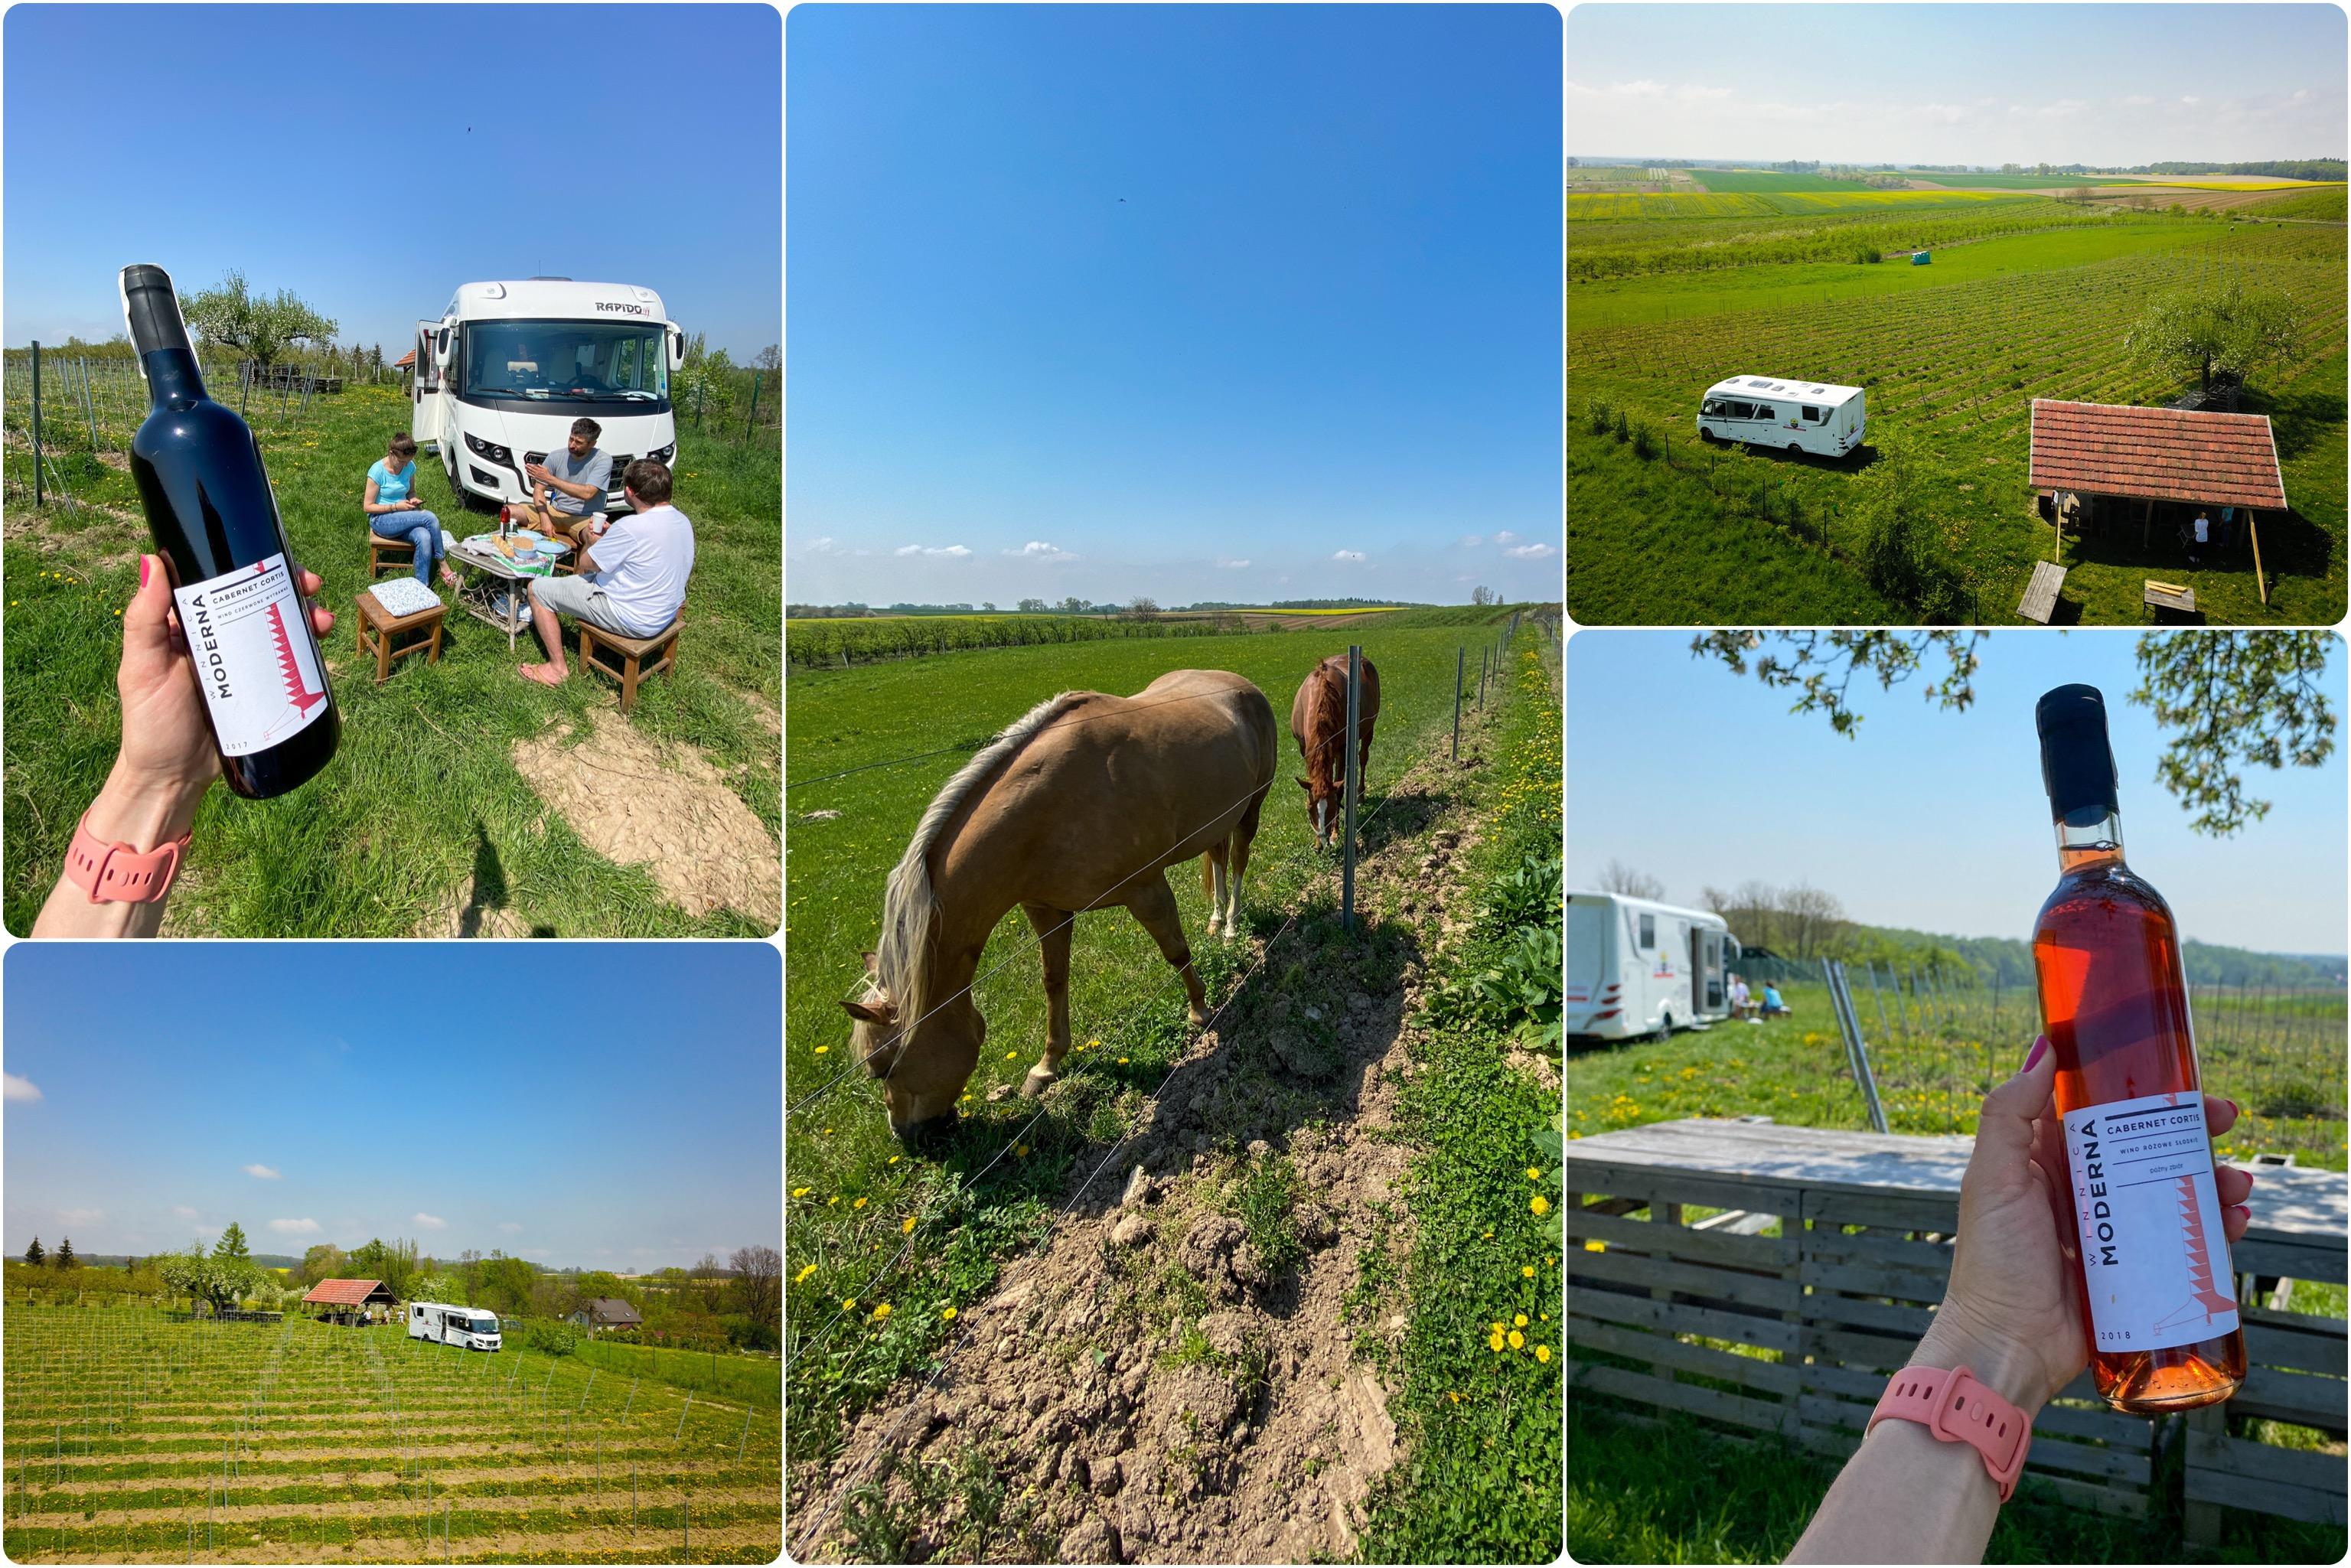 7 vineyards of Lower Silesia that we visited in a motorhome – image 2